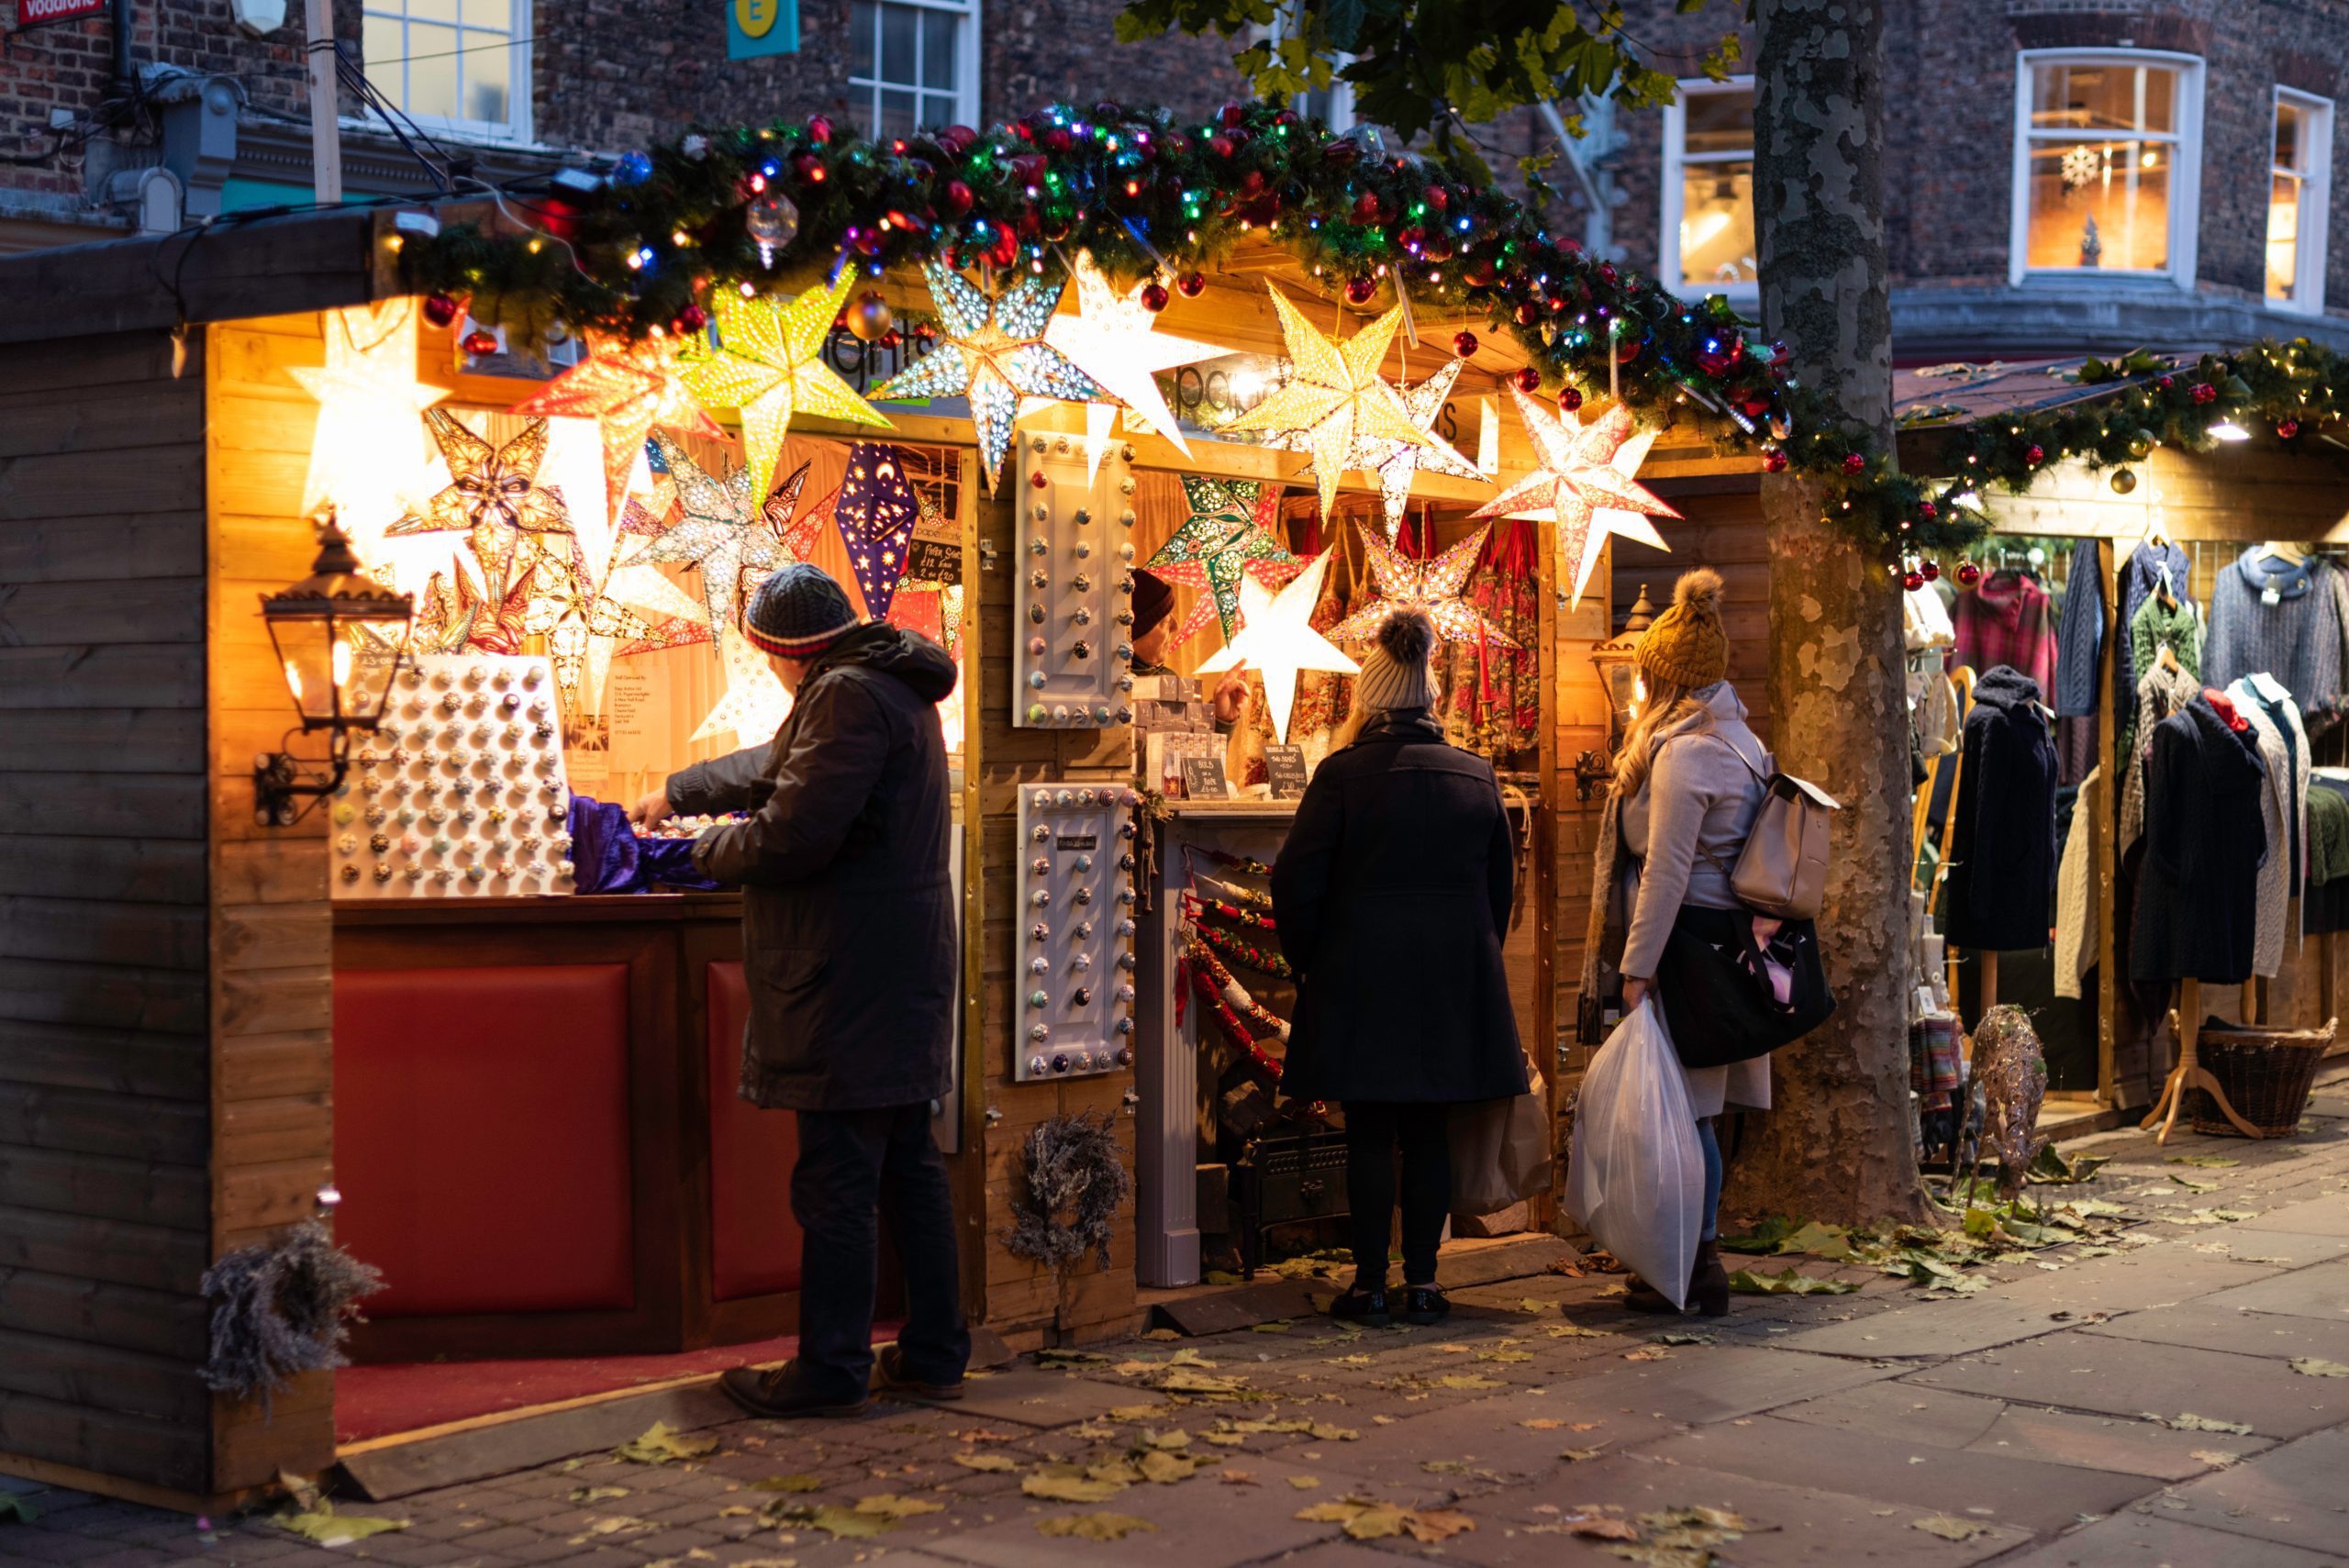 An Unforgettable Festive Getaway Awaits: Things To Do at Christmas in York